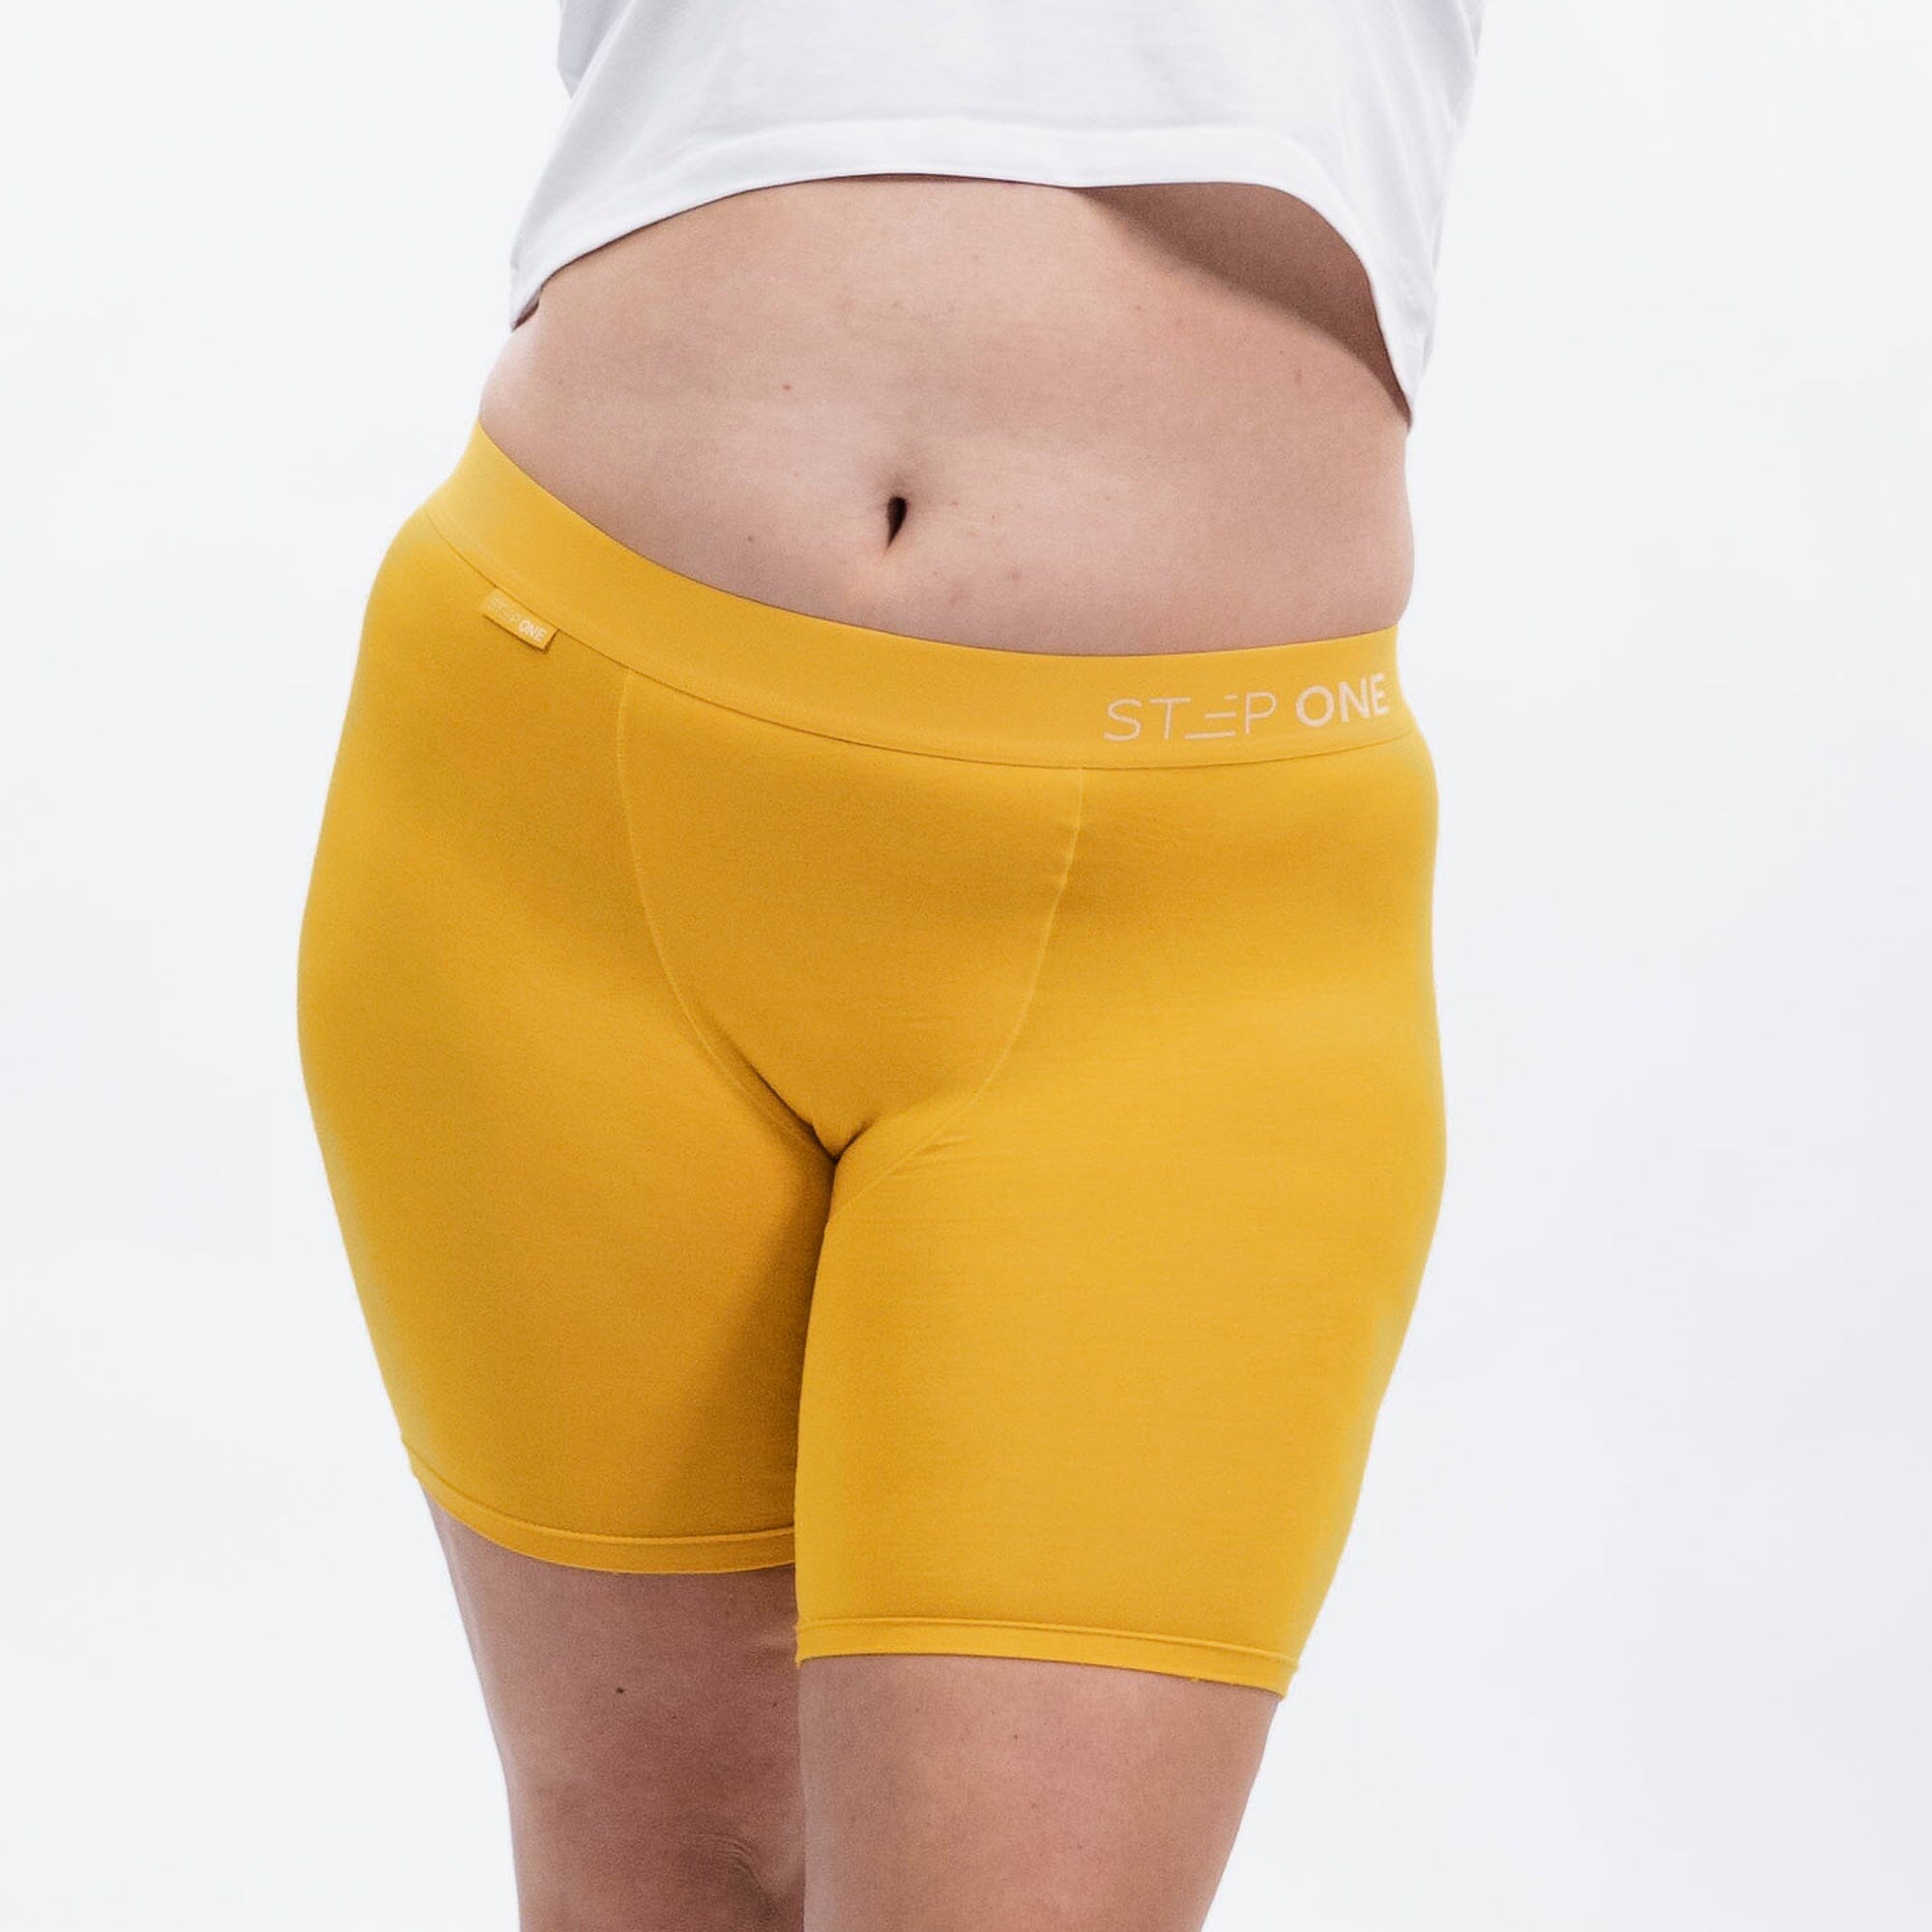 Women's Boxer Brief - Cheeky Cheddars - Model - #size_2XL